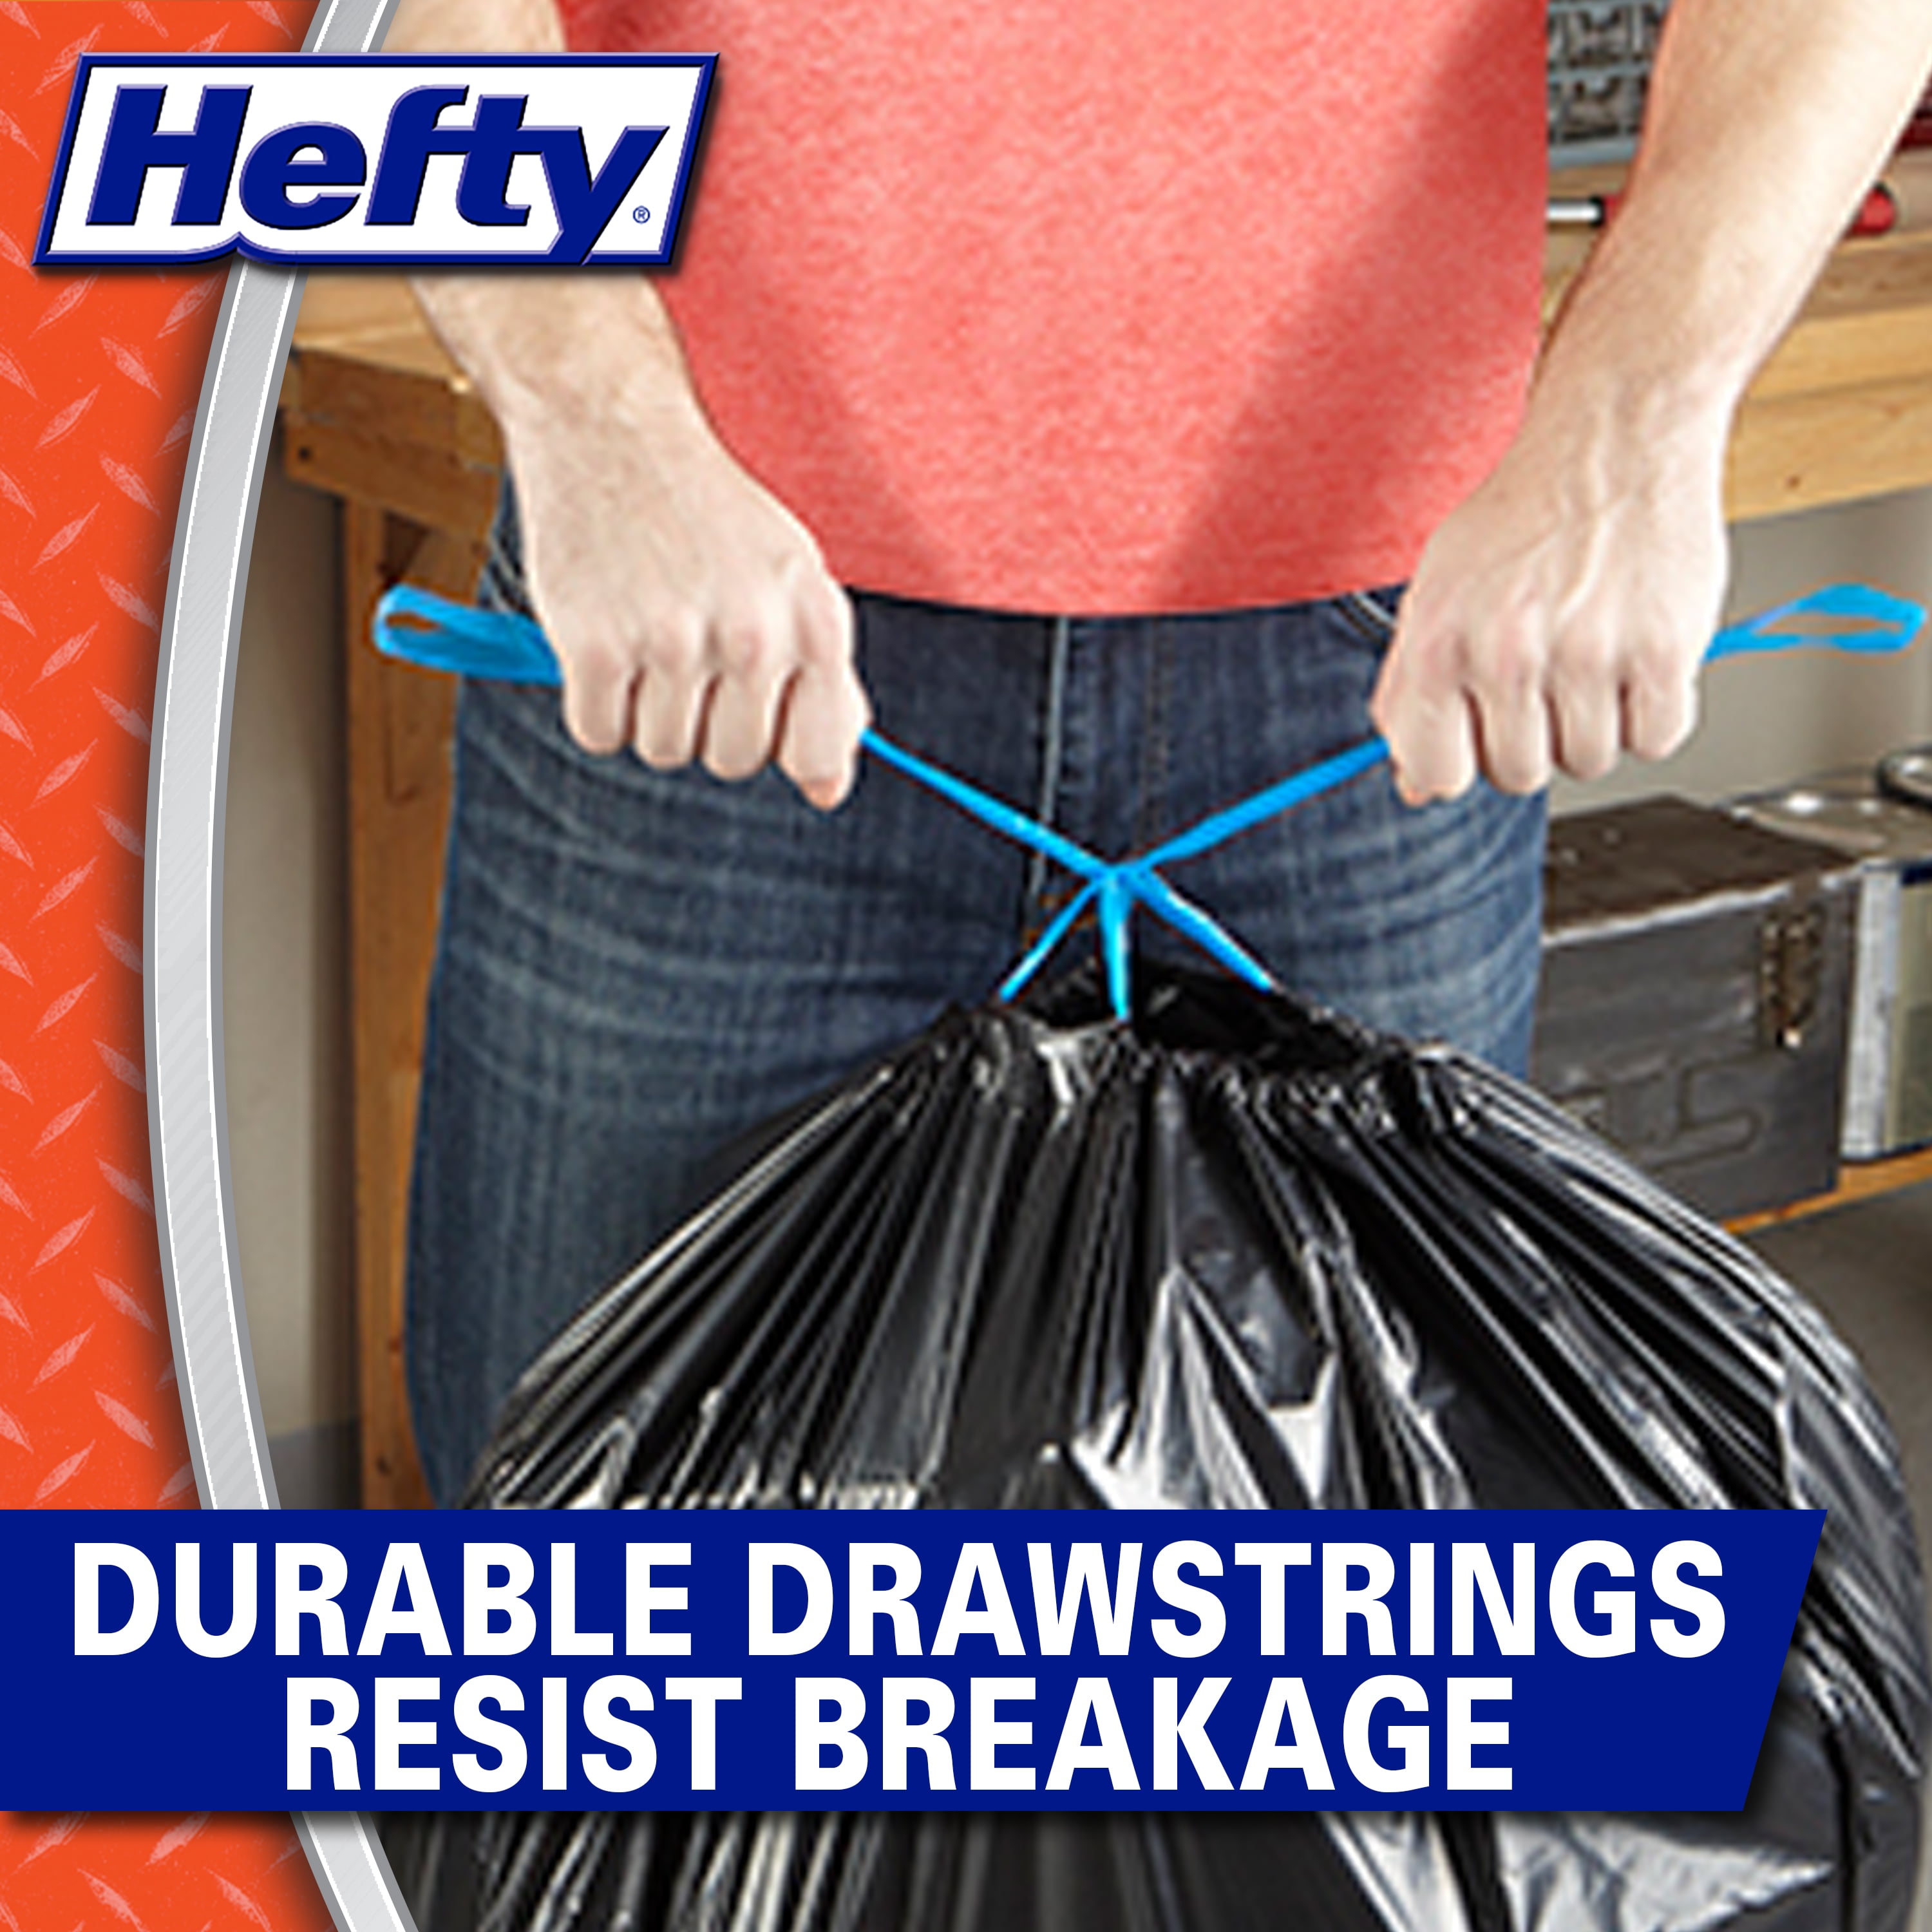  Hefty Strong Large Multipurpose Trash Bags -, 30 Gallon, 28  Count : Health & Household